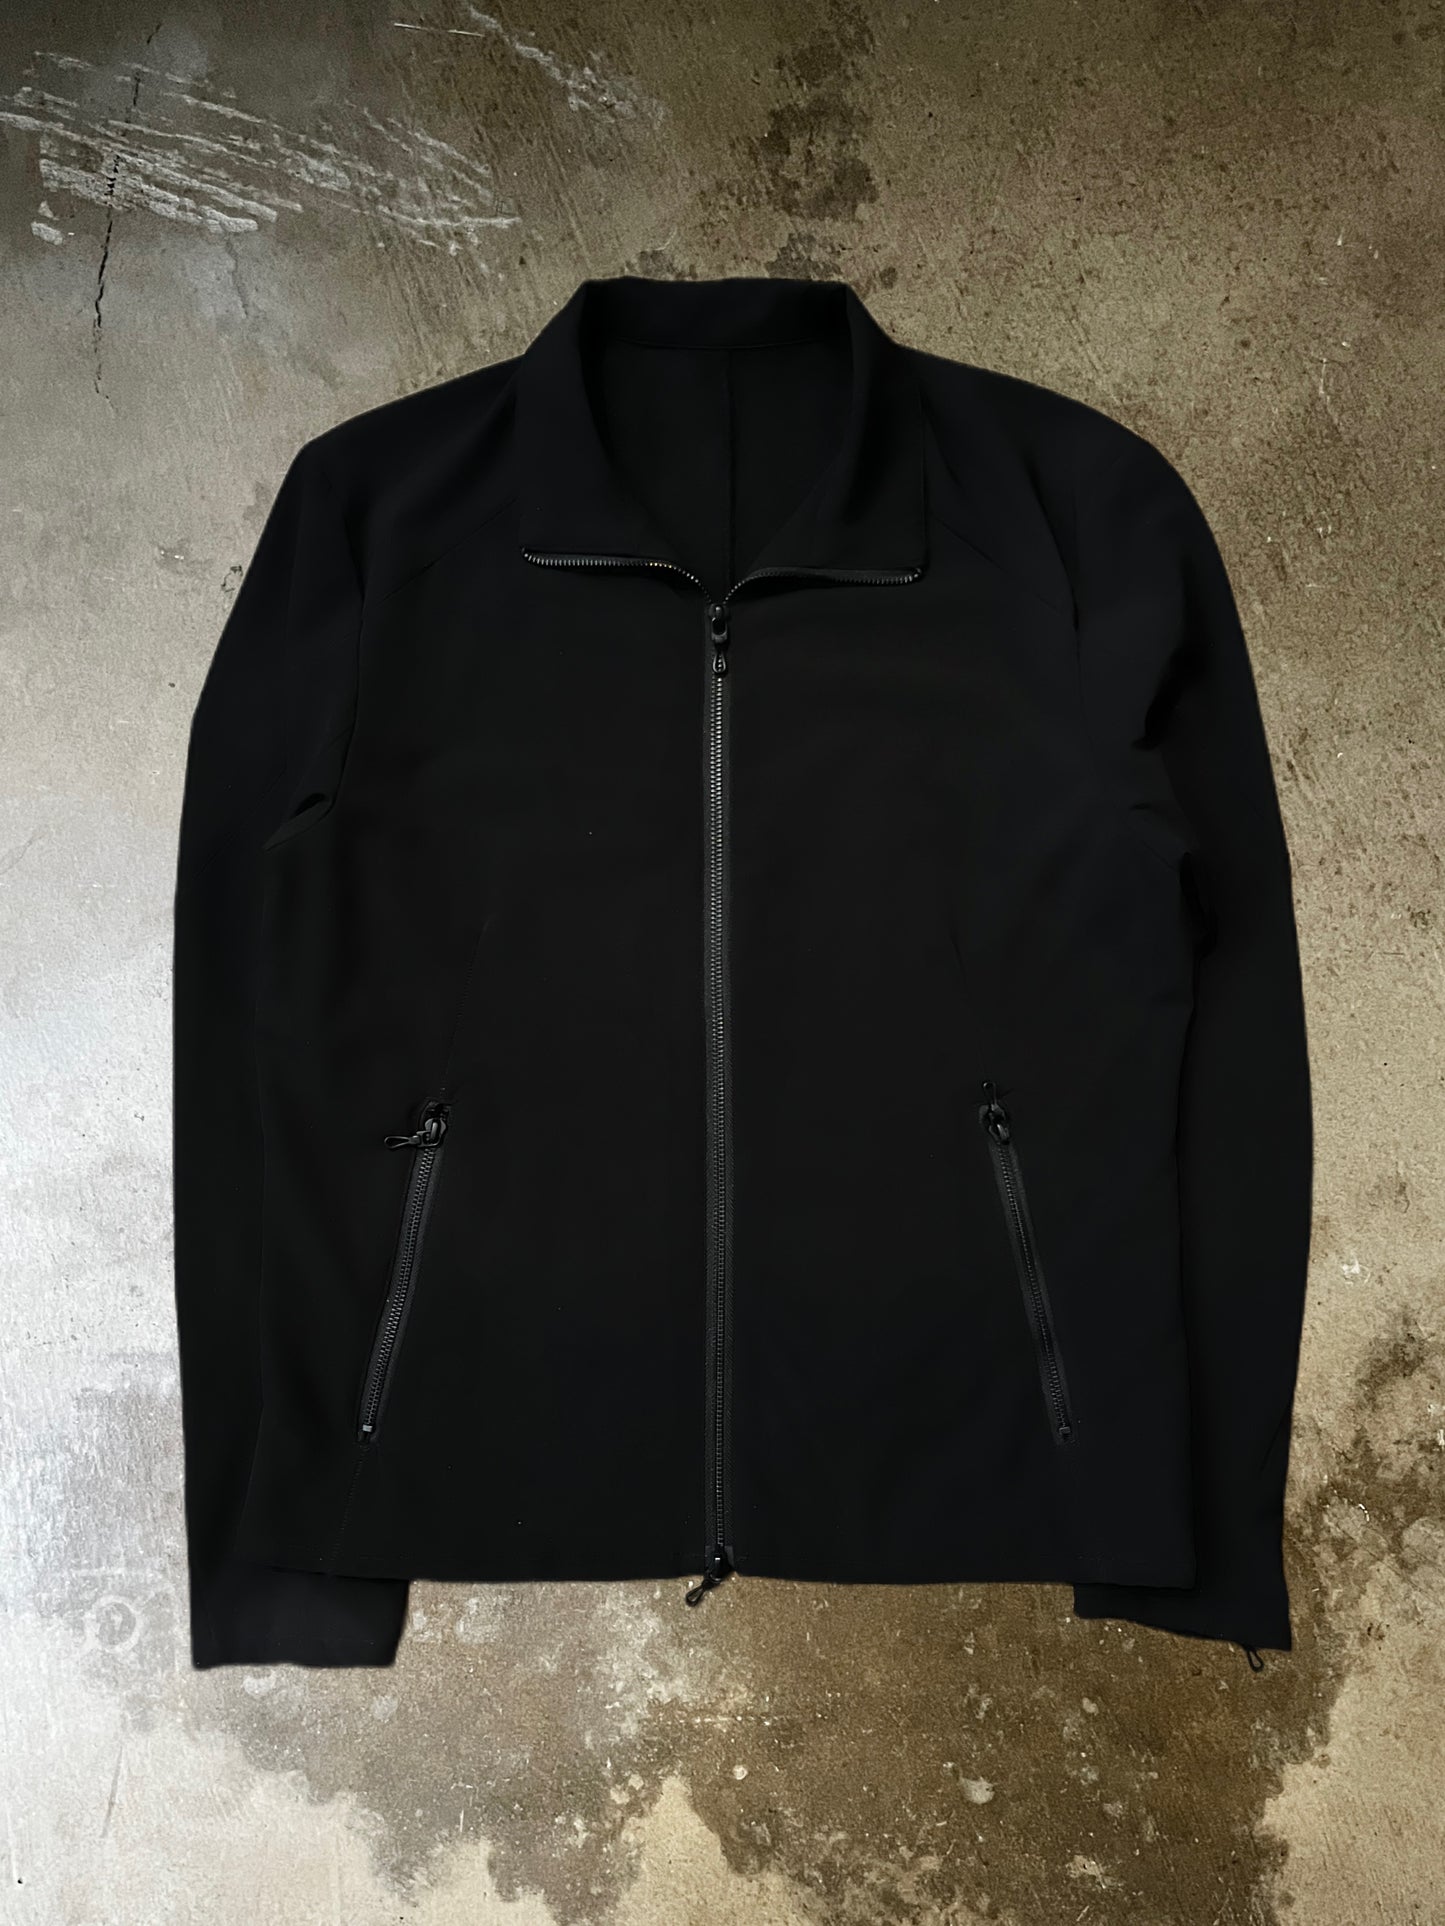 Shellac "There Is No Defeat" Mesh Panel Zip-Up